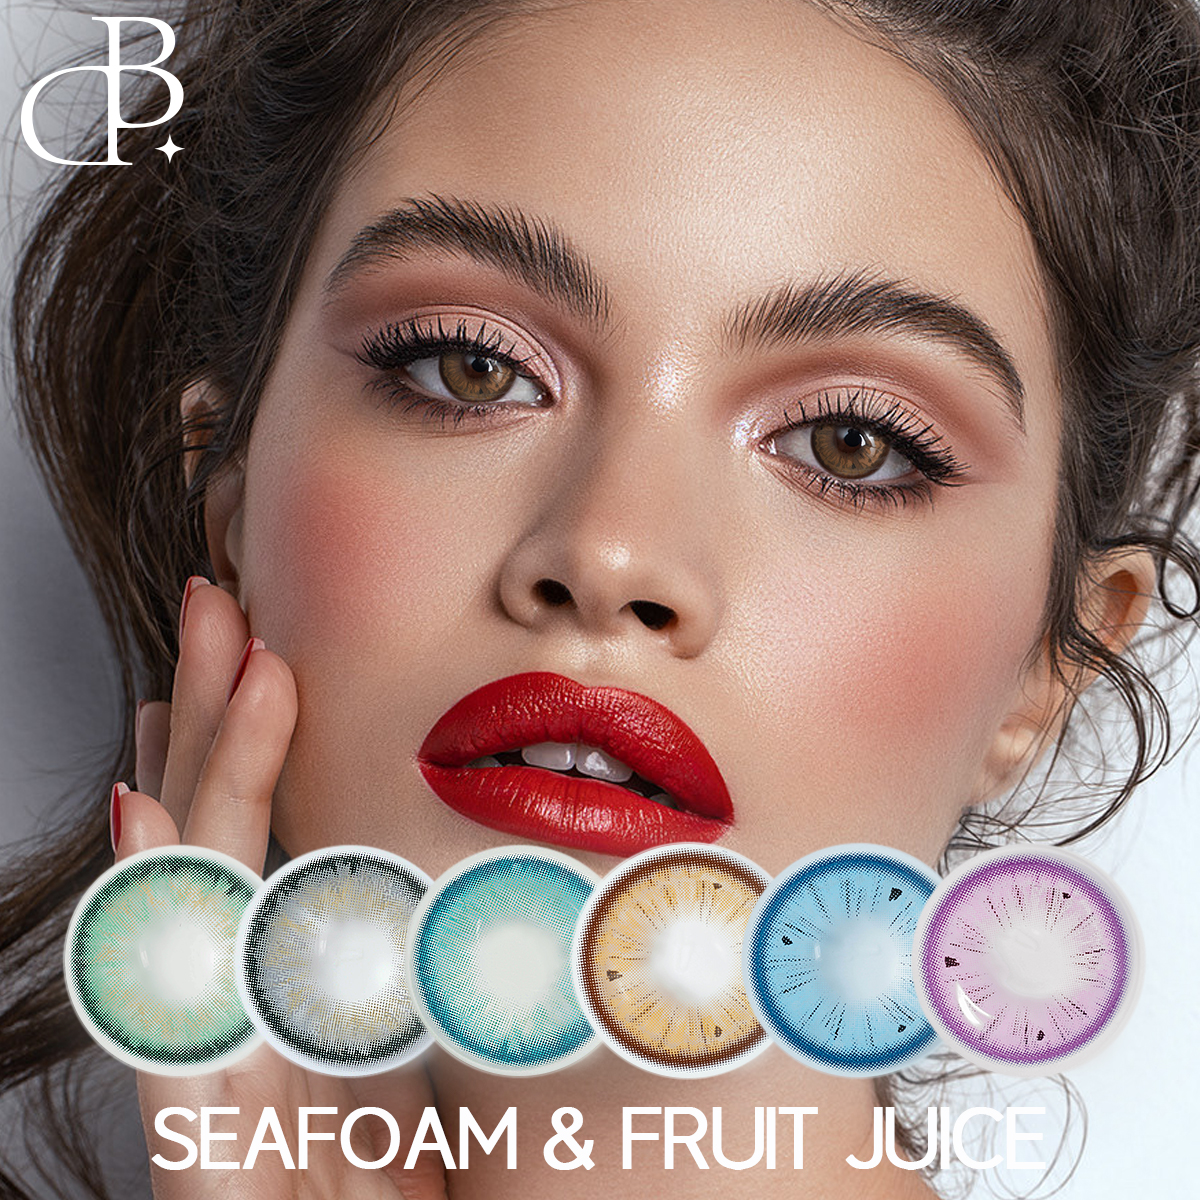 https://www.dblenses.com/seafoamfruit-juice-oemodm-contacto-new-style-natural-eyes-coloured-lens-cosmetic-eyes-lens-color-contacts-lenses-product/